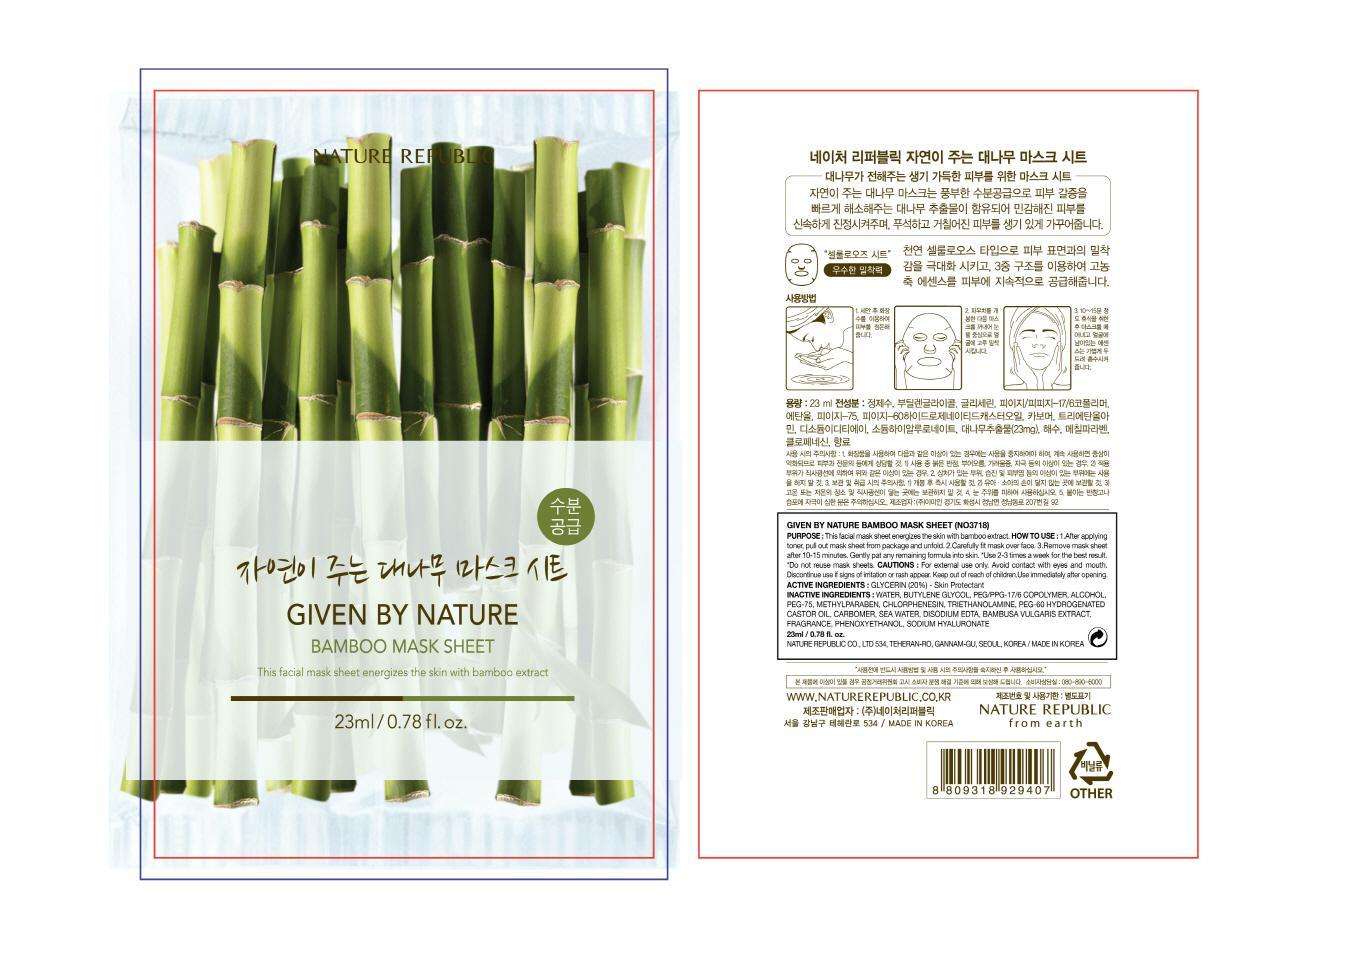 GIVEN BY NATURE BAMBOO MASK SHEET